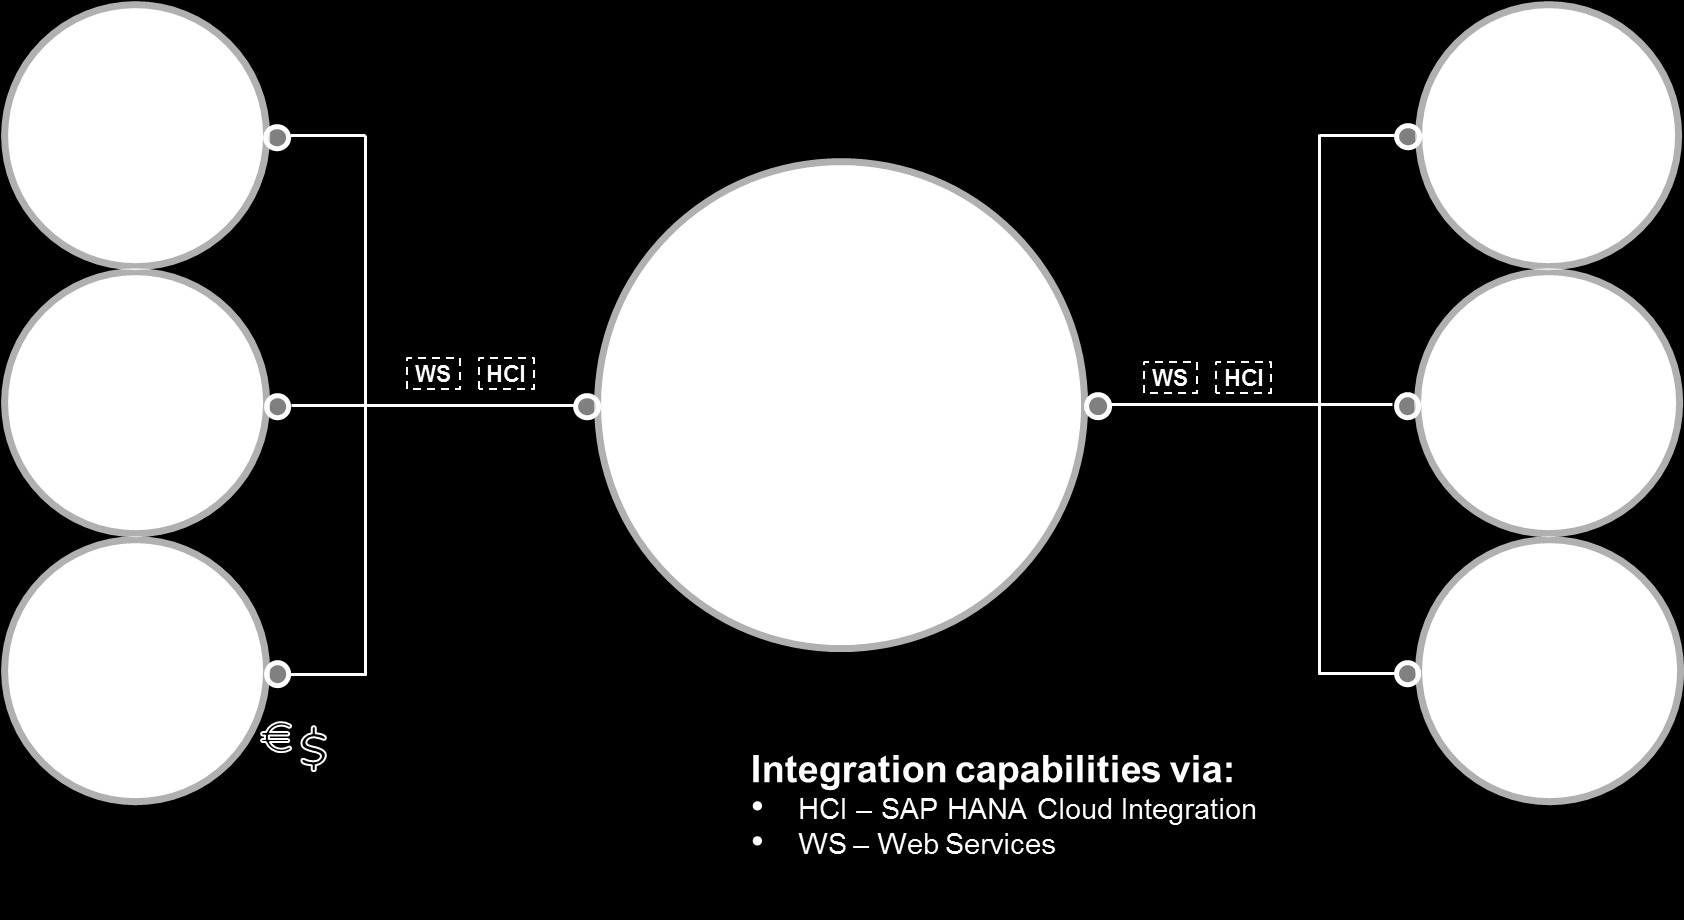 3 SAP S/4HANA, Cloud Edition Integration Other than the on premise edition, SAP S/4HANA, cloud edition is designed for enterprises that need standardized cloud integration offerings that cover the